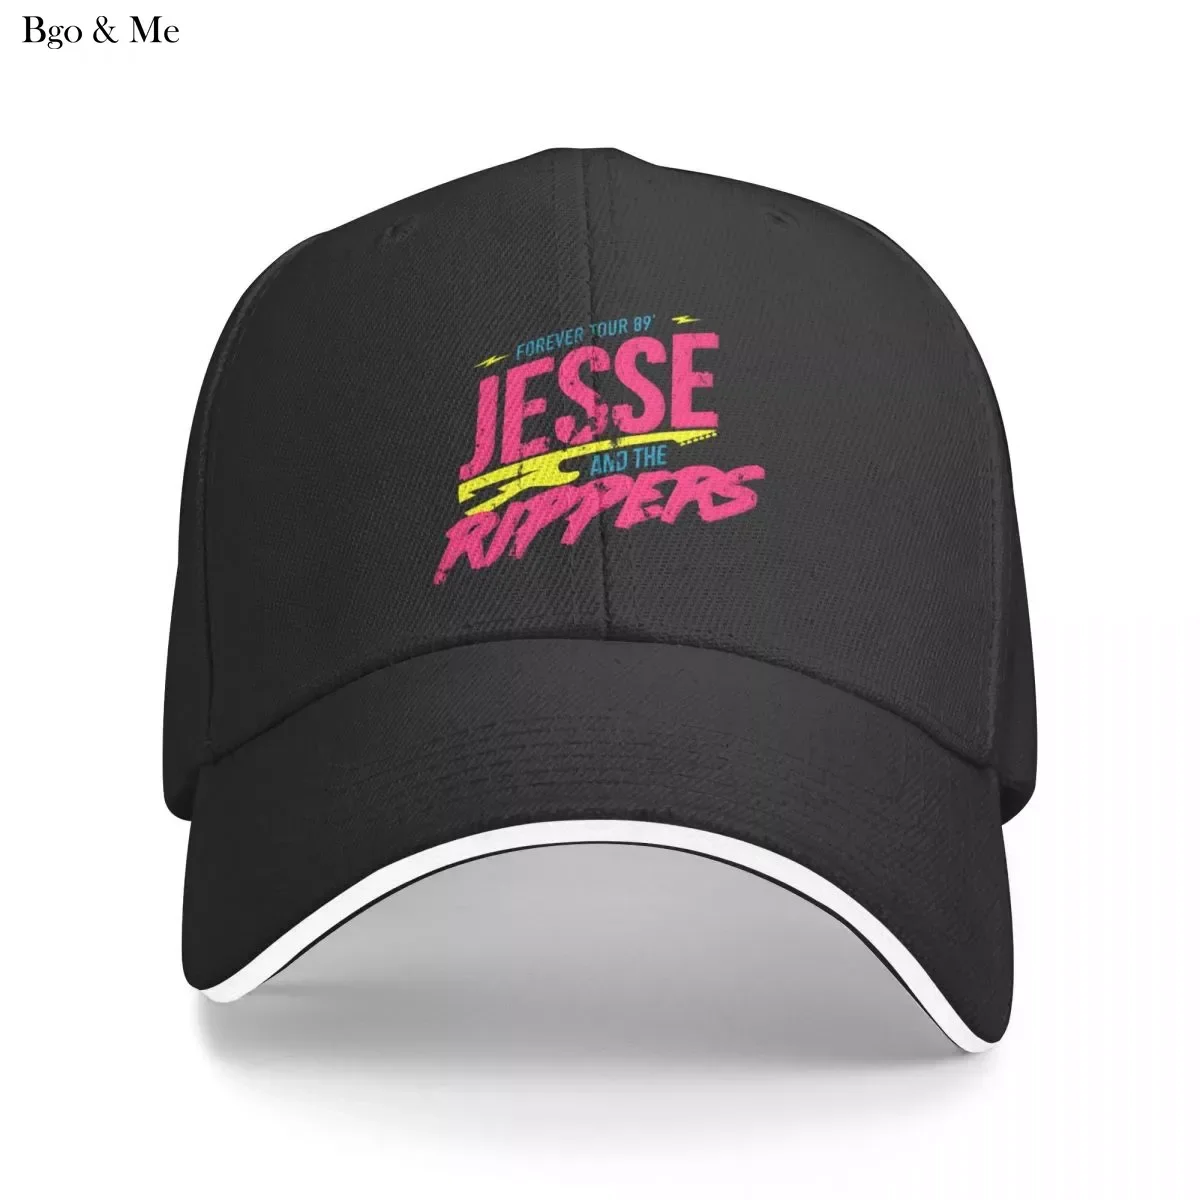 

2023 New Jesse And The Rippers: Forever Tour 89’ Baseball Cap Birthday Cosplay Woman Hat Men's